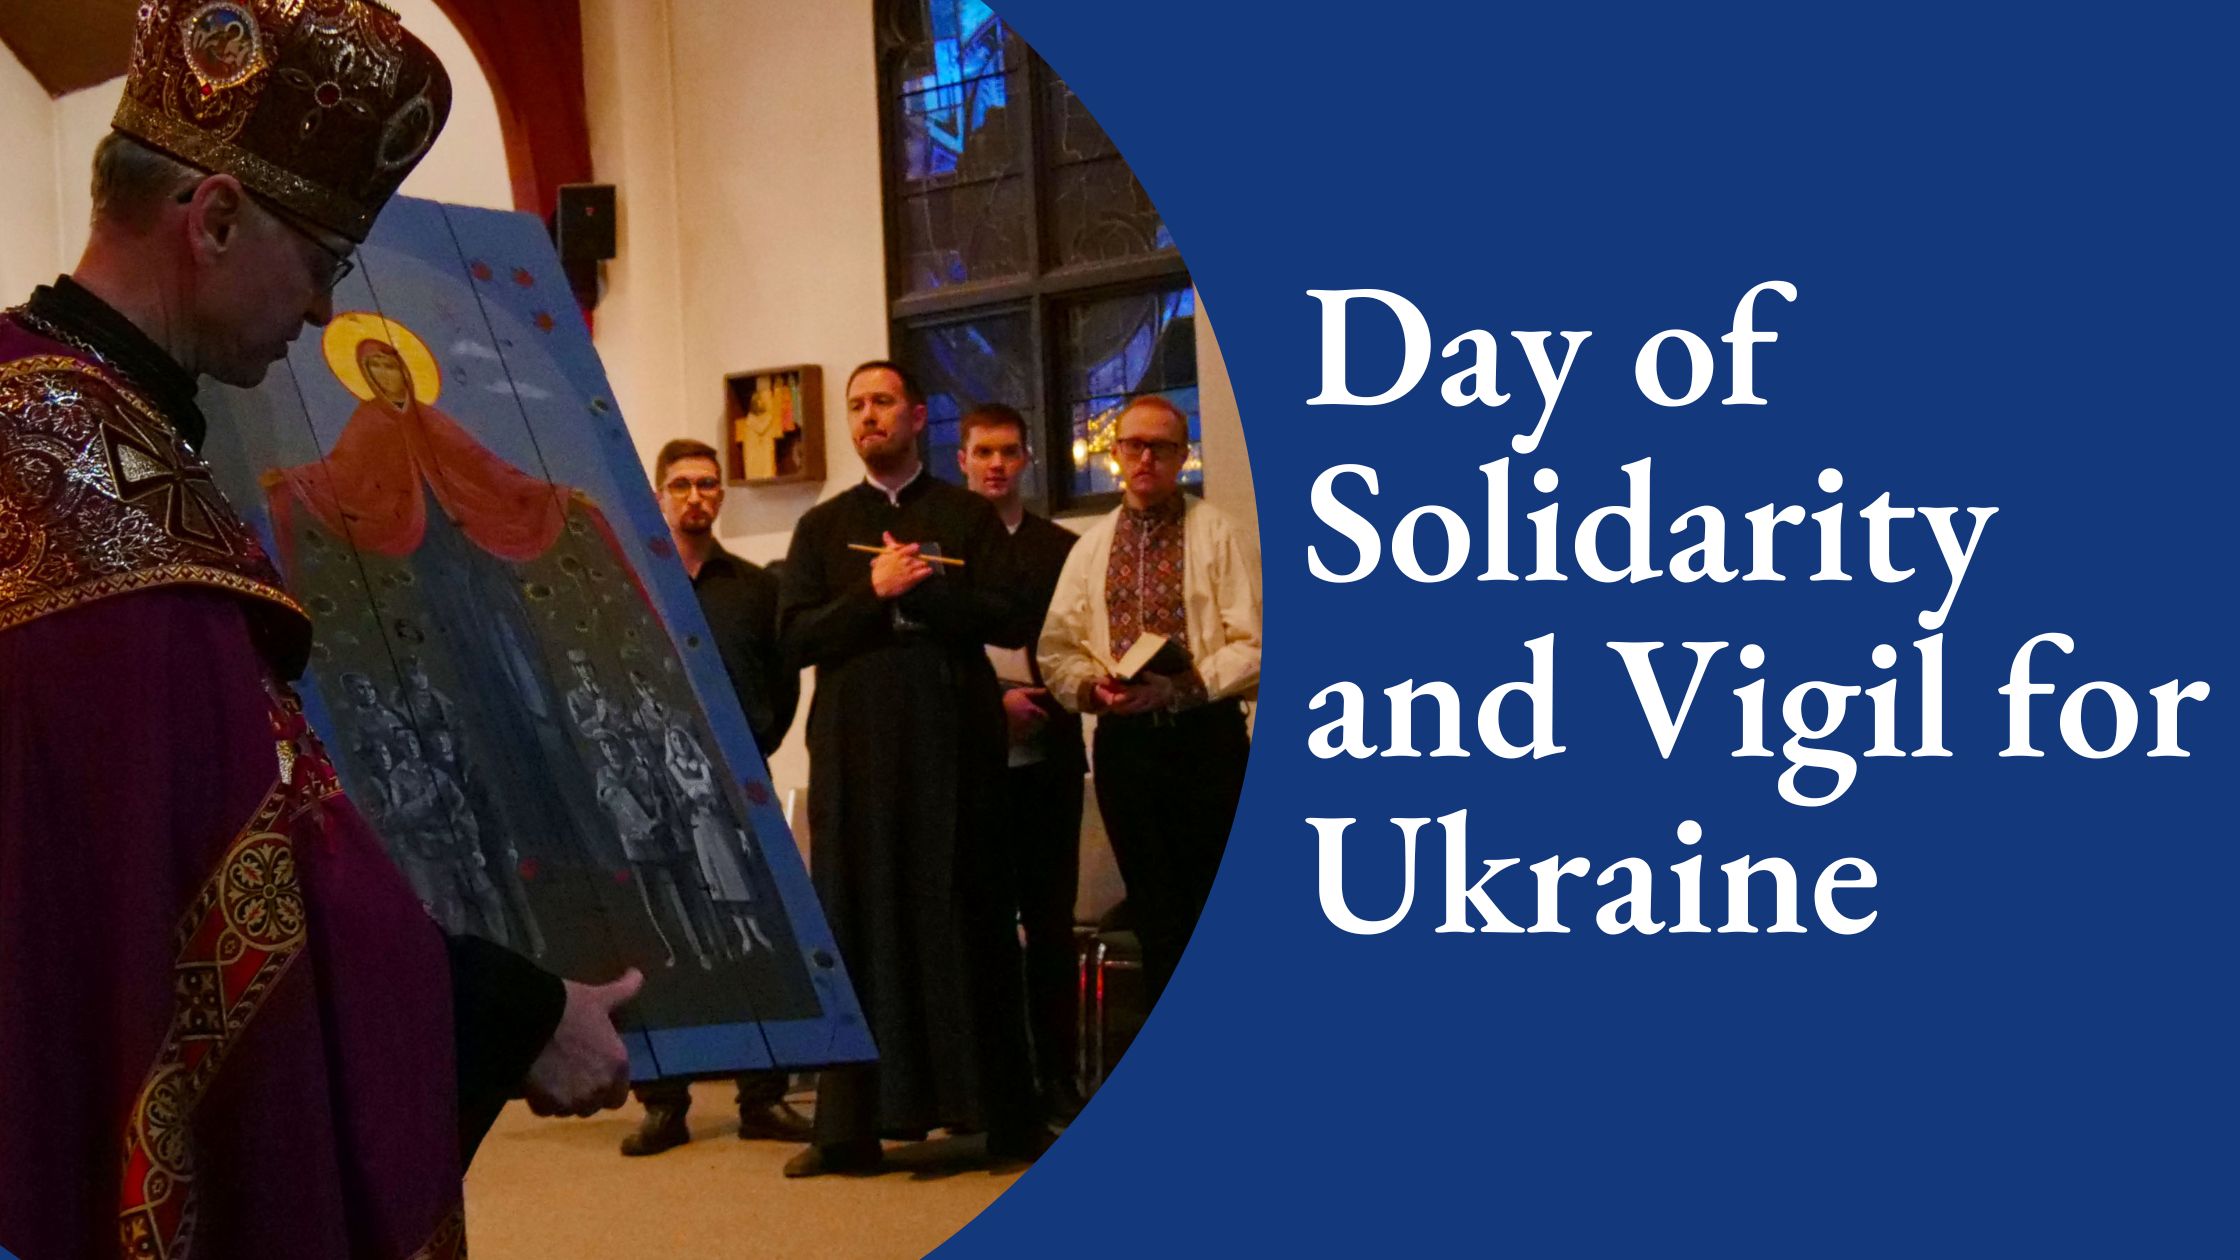 Day of Solidarity and Vigil for Ukraine